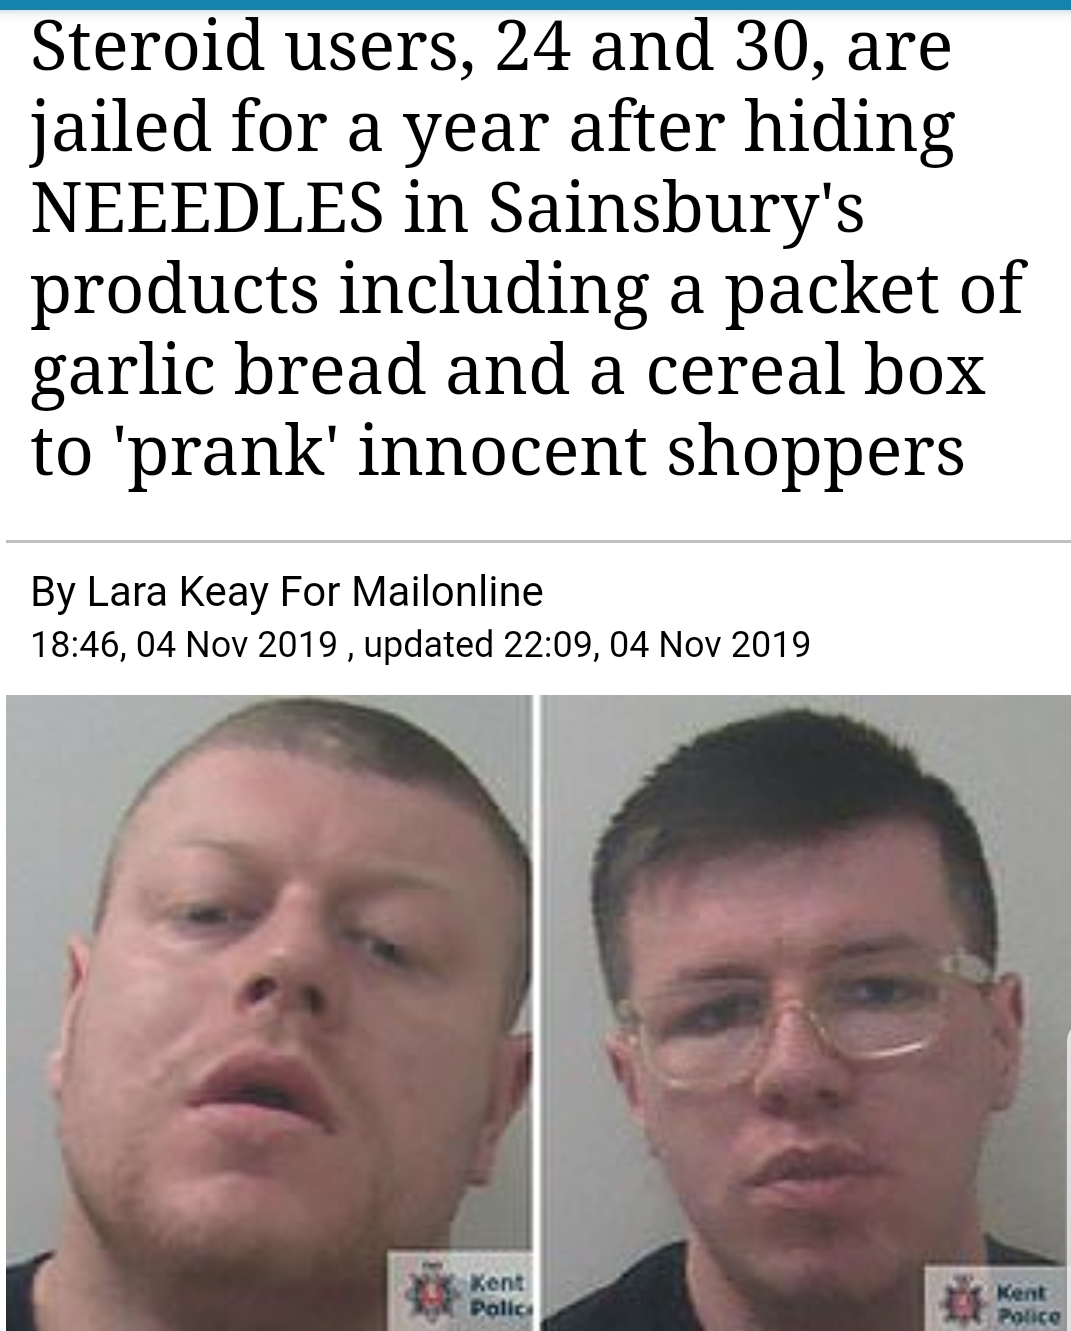 facial expression - Steroid users, 24 and 30, are jailed for a year after hiding Neeedles in Sainsbury's products including a packet of garlic bread and a cereal box to 'prank' innocent shoppers By Lara Keay For Mailonline , , updated , Kent Polo Ponce